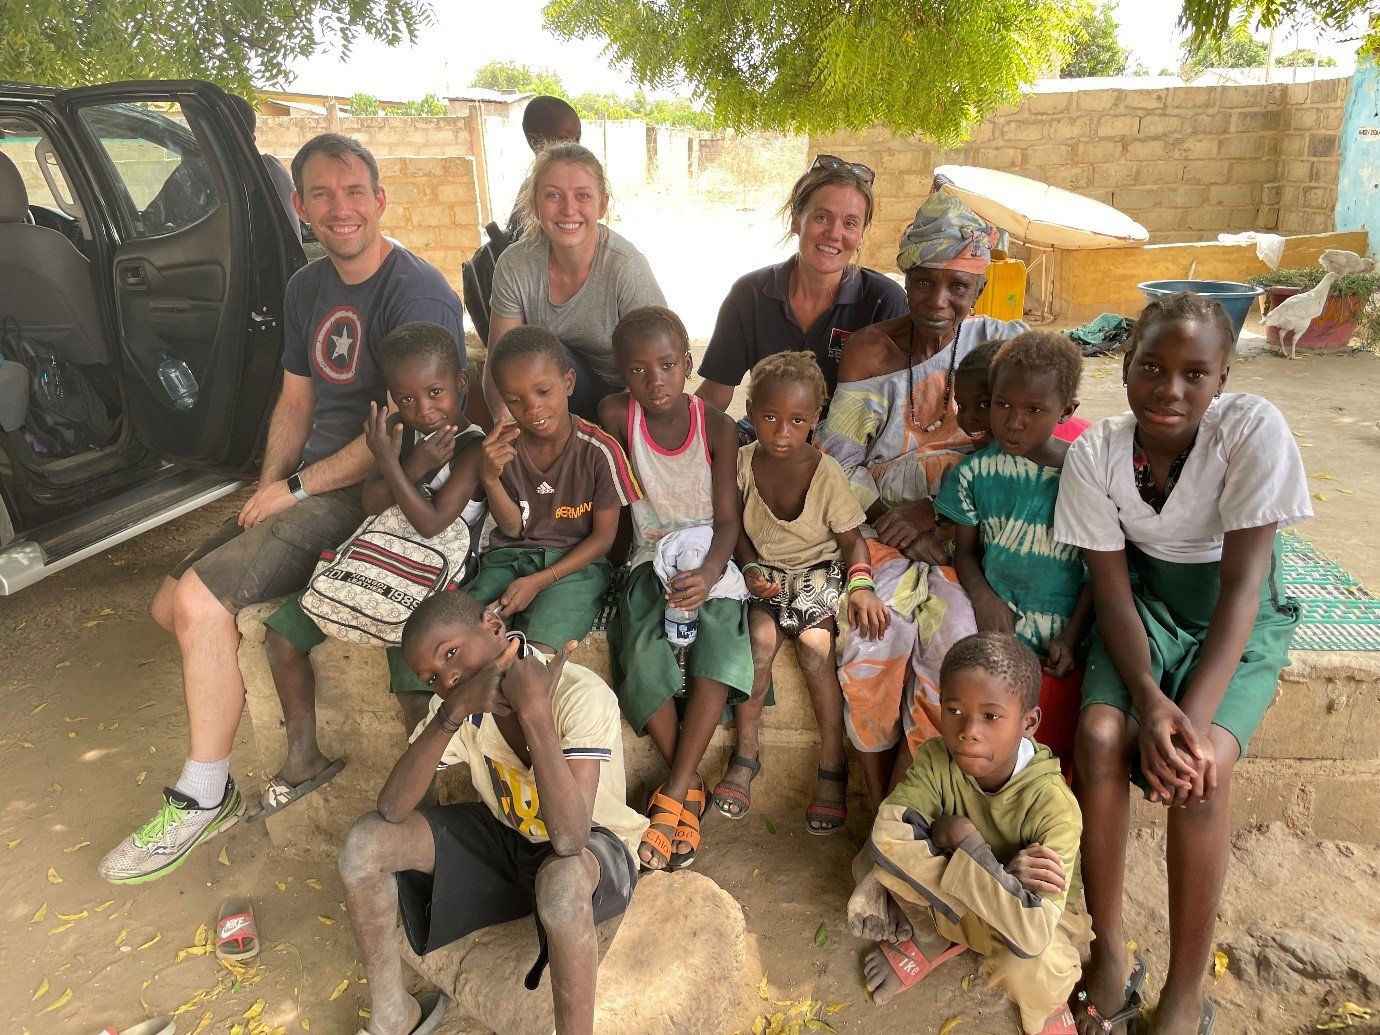 UK Clinical team visit the Gambia